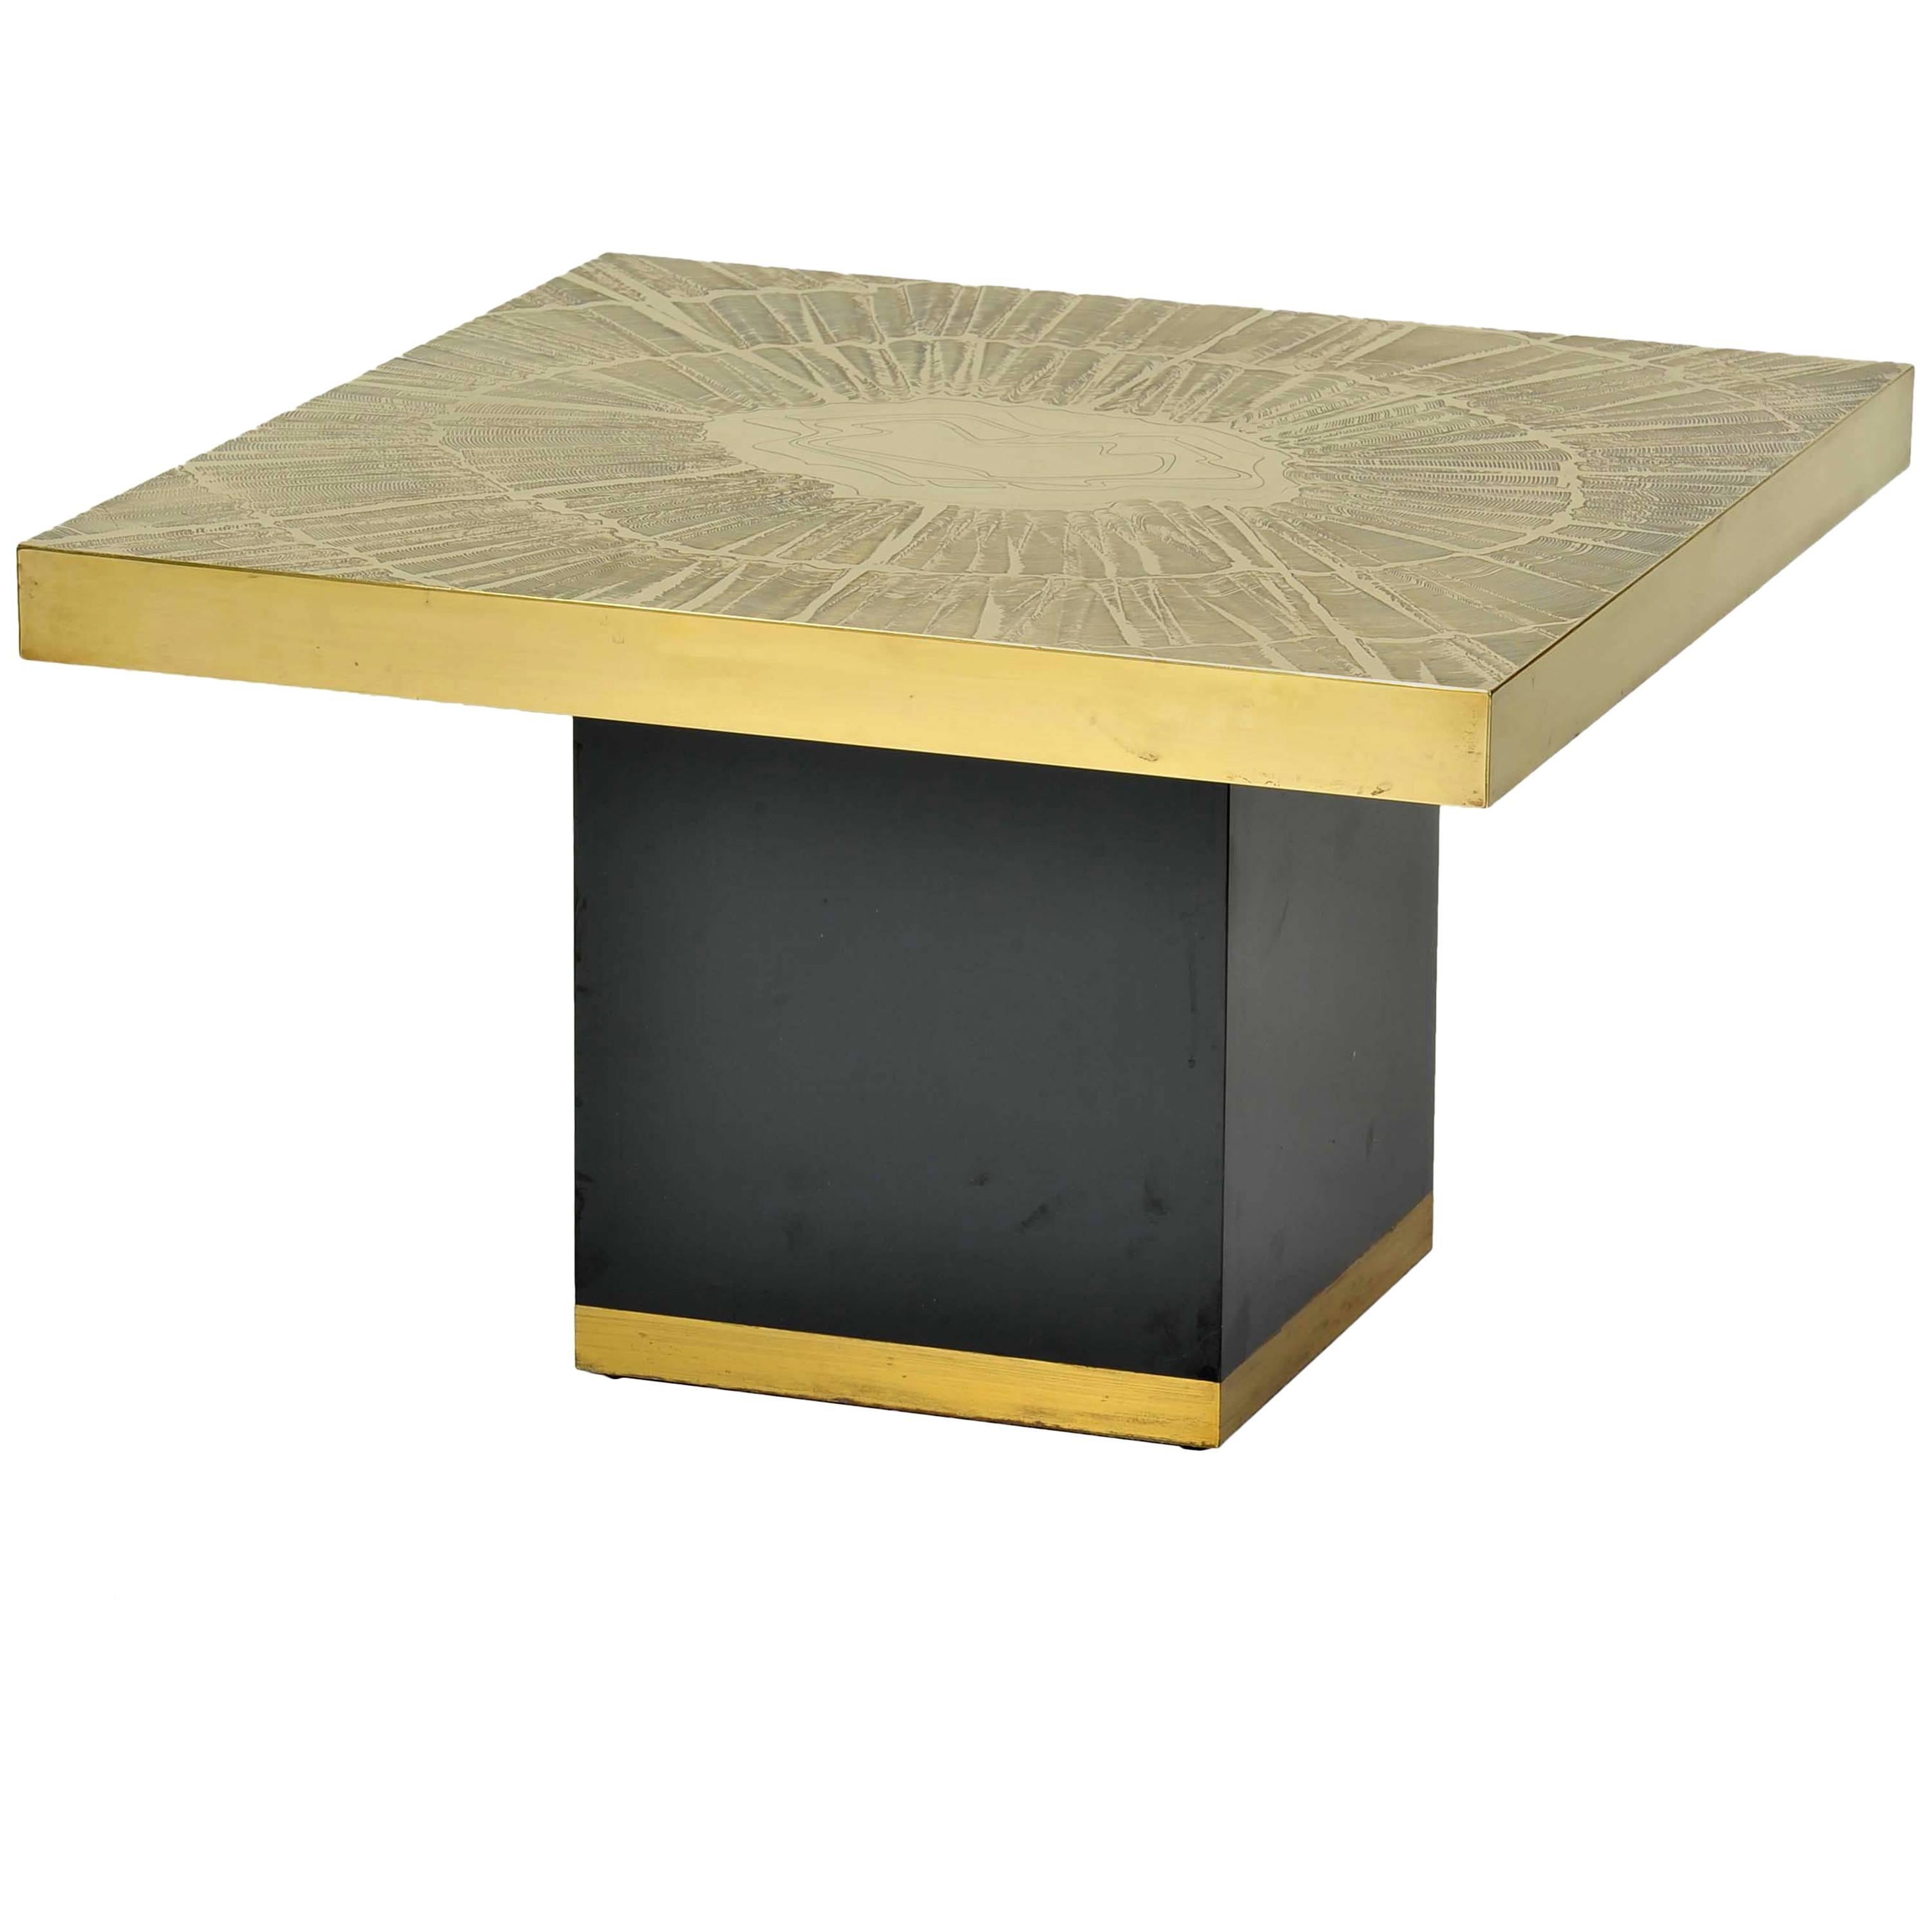 1970's Etched Brass Brutalist Square Coffee Table with Abstract Sun Ray Design